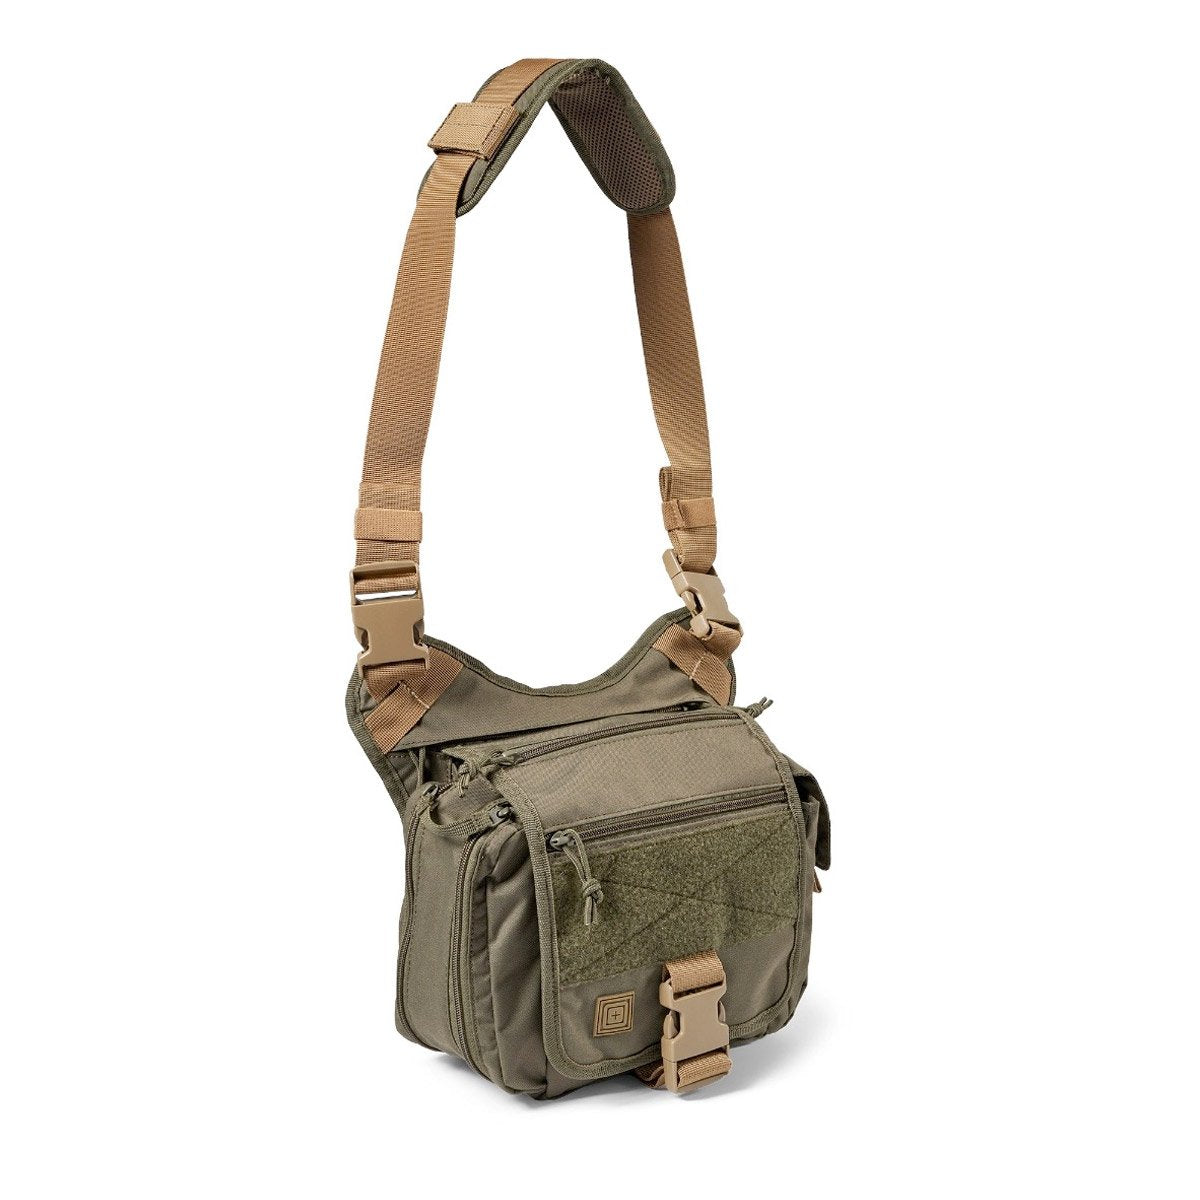 5.11 Tactical Daily Deploy Push Pack 5L | Tactical Gear Australia Tactical Gear